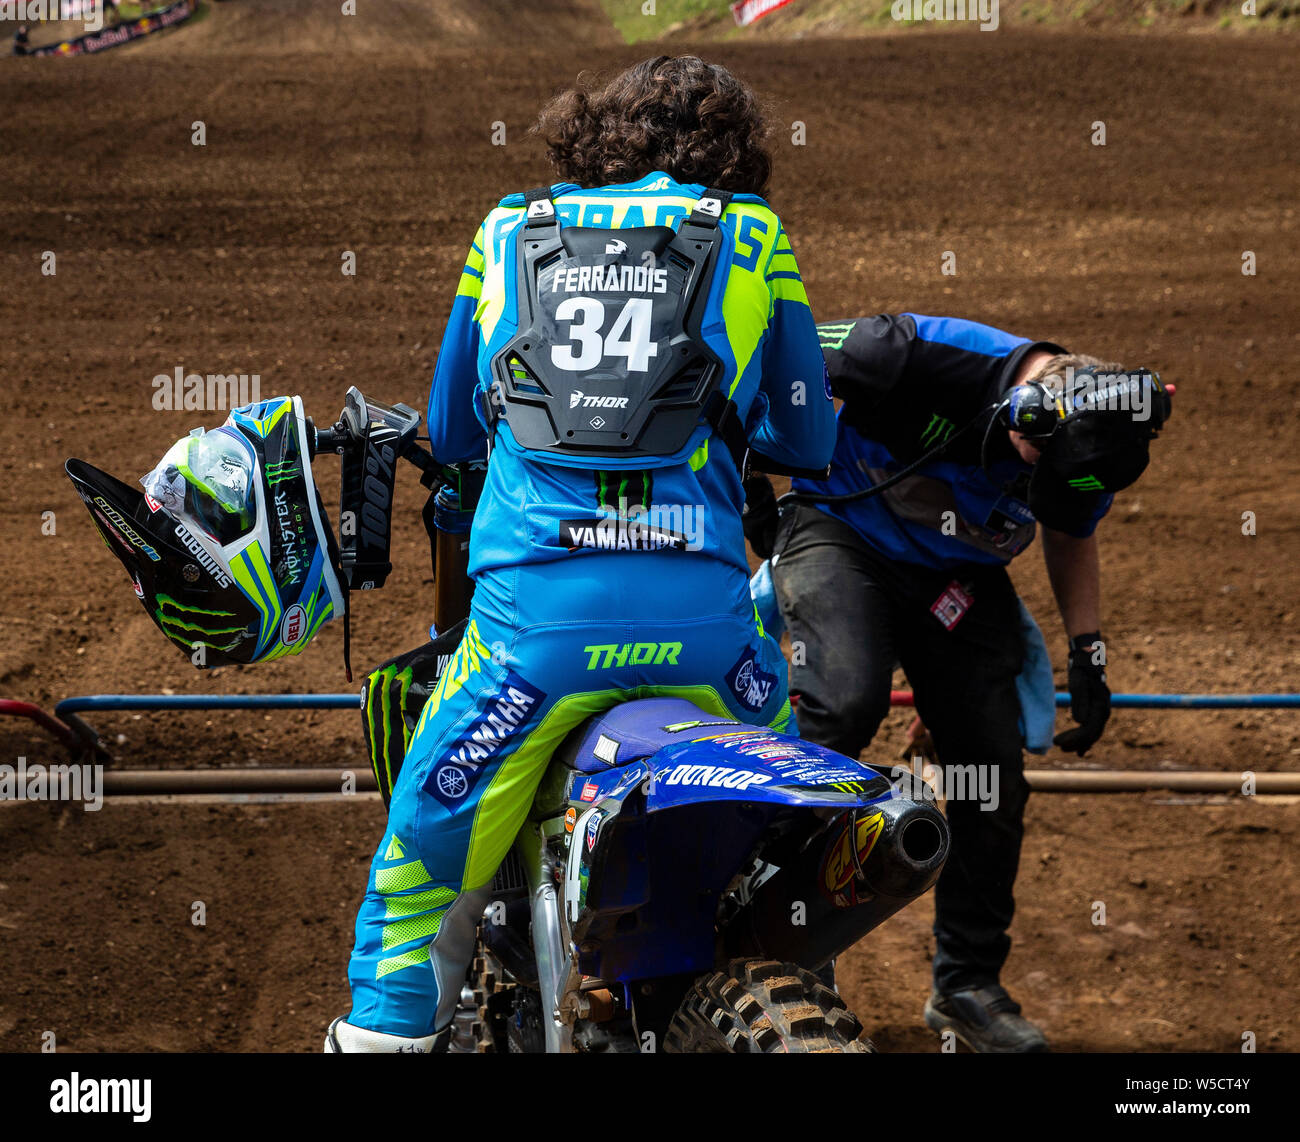 Washougal, USA. 27th July, 2019. # 34 Dylan Ferrandos at the starting line during the Lucas Oil Pro Motocross Washougal National 250 class championship at Washougal mx park Washougal, WA Thurman James / CSM Credit: Cal Sport Media/Alamy Live News Stock Photo